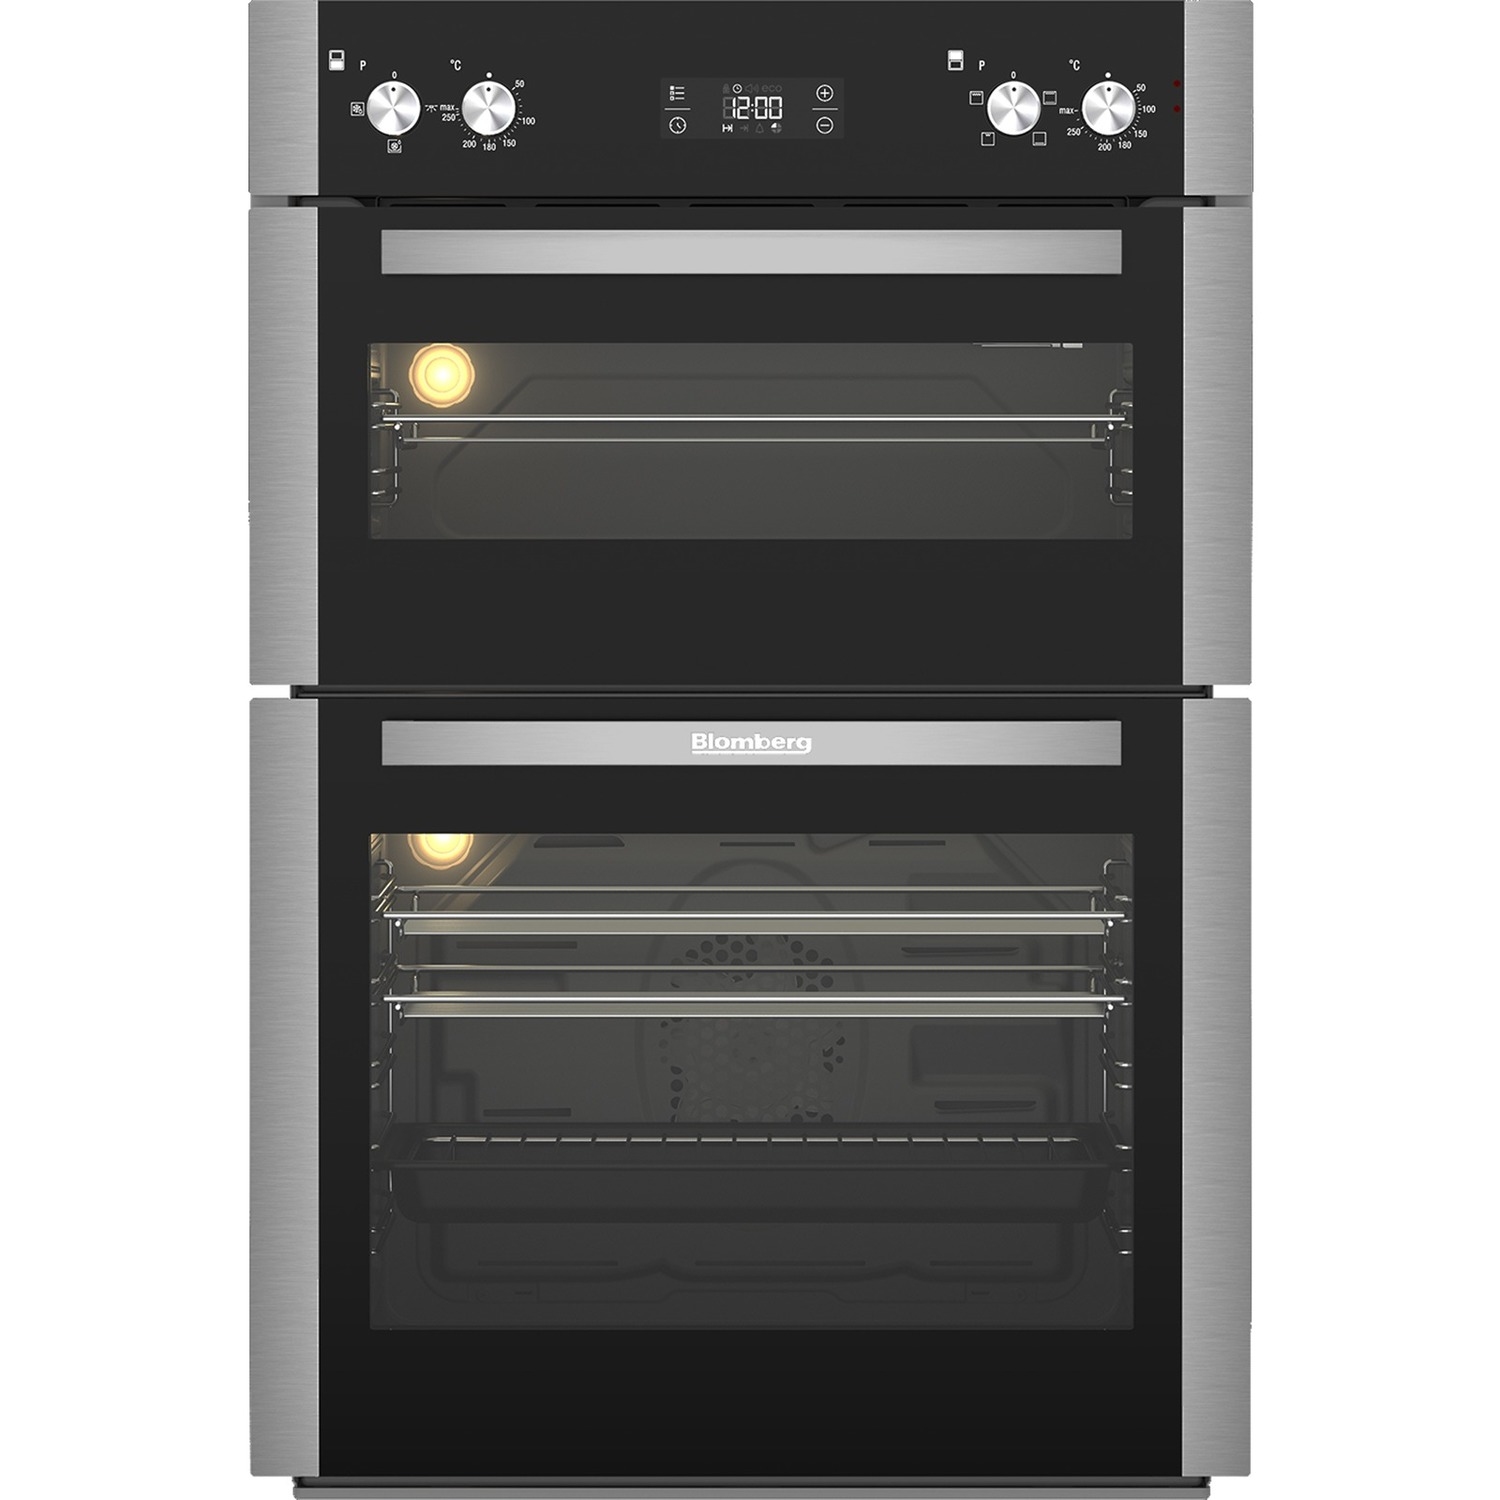 Blomberg ODN9302X 60cm Built In Electric Double Oven - Stainless Steel - 0